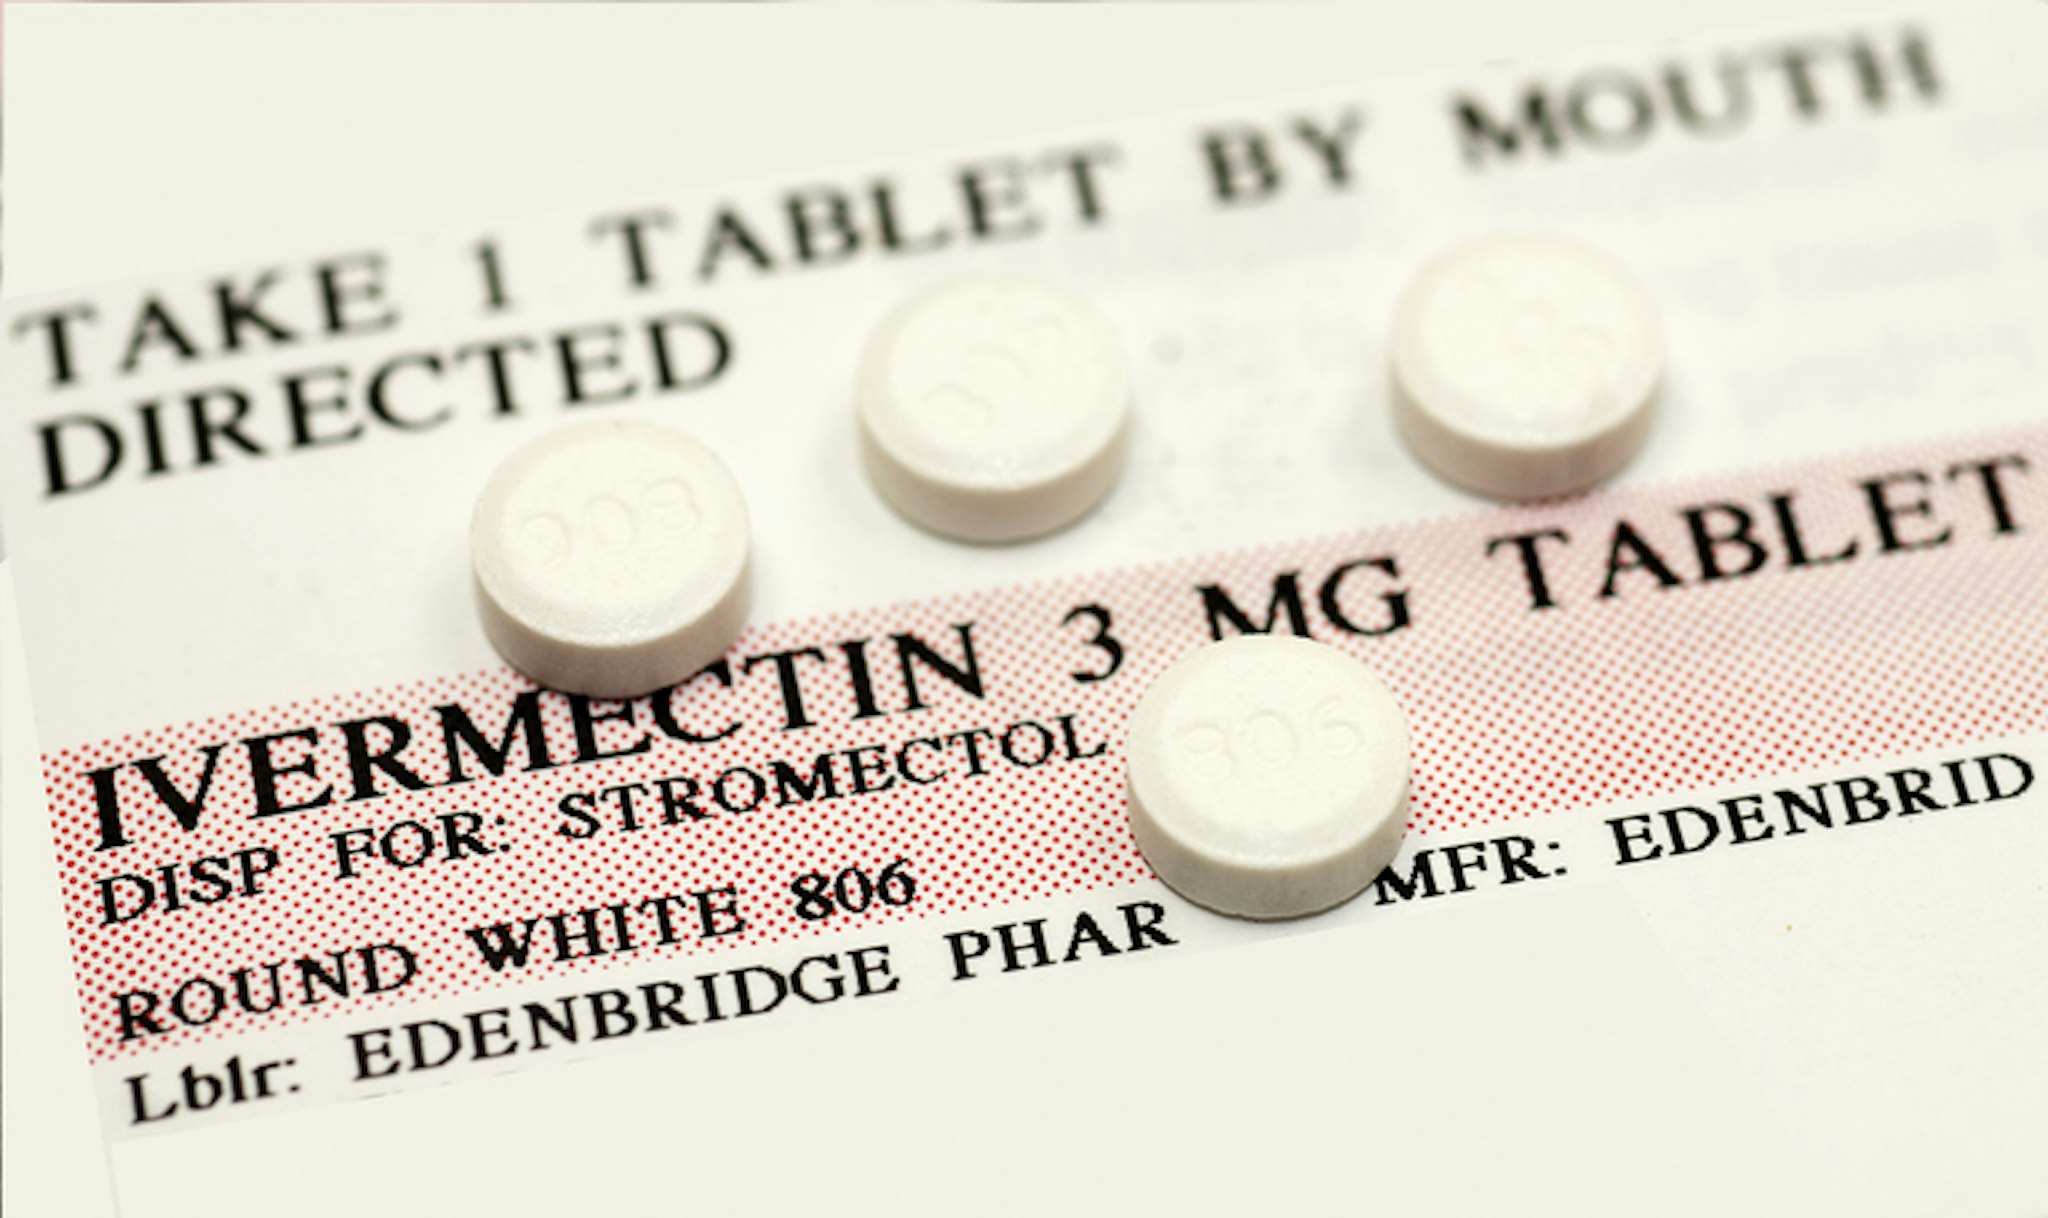 Ivermectin pills (a broad-spectrum antiparasitic agent) on top of instruction label